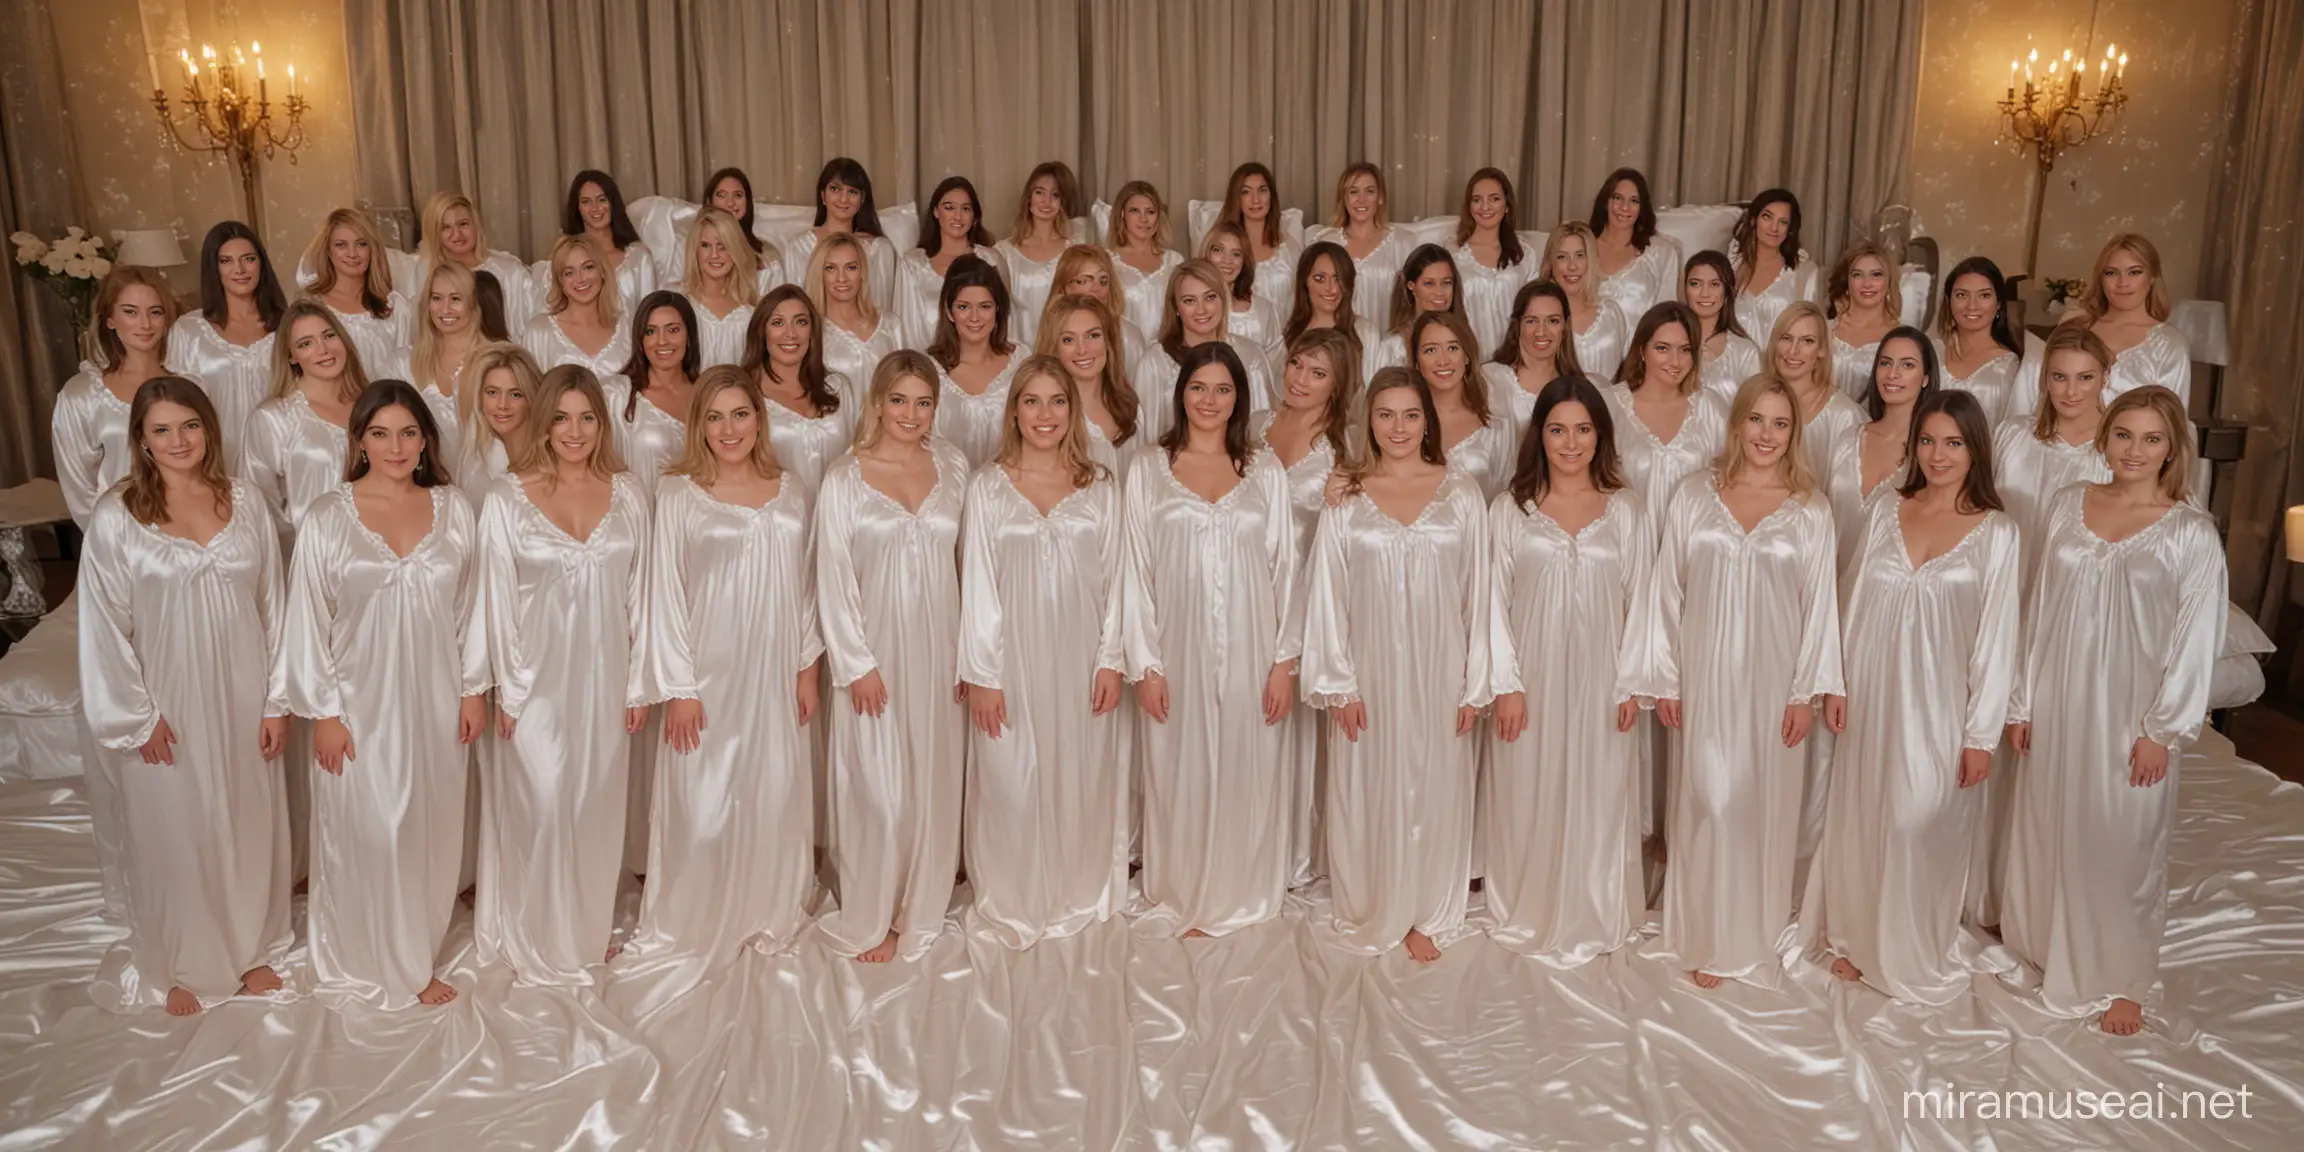 30 Women in Milky Satin Nightgowns on Giant Bed